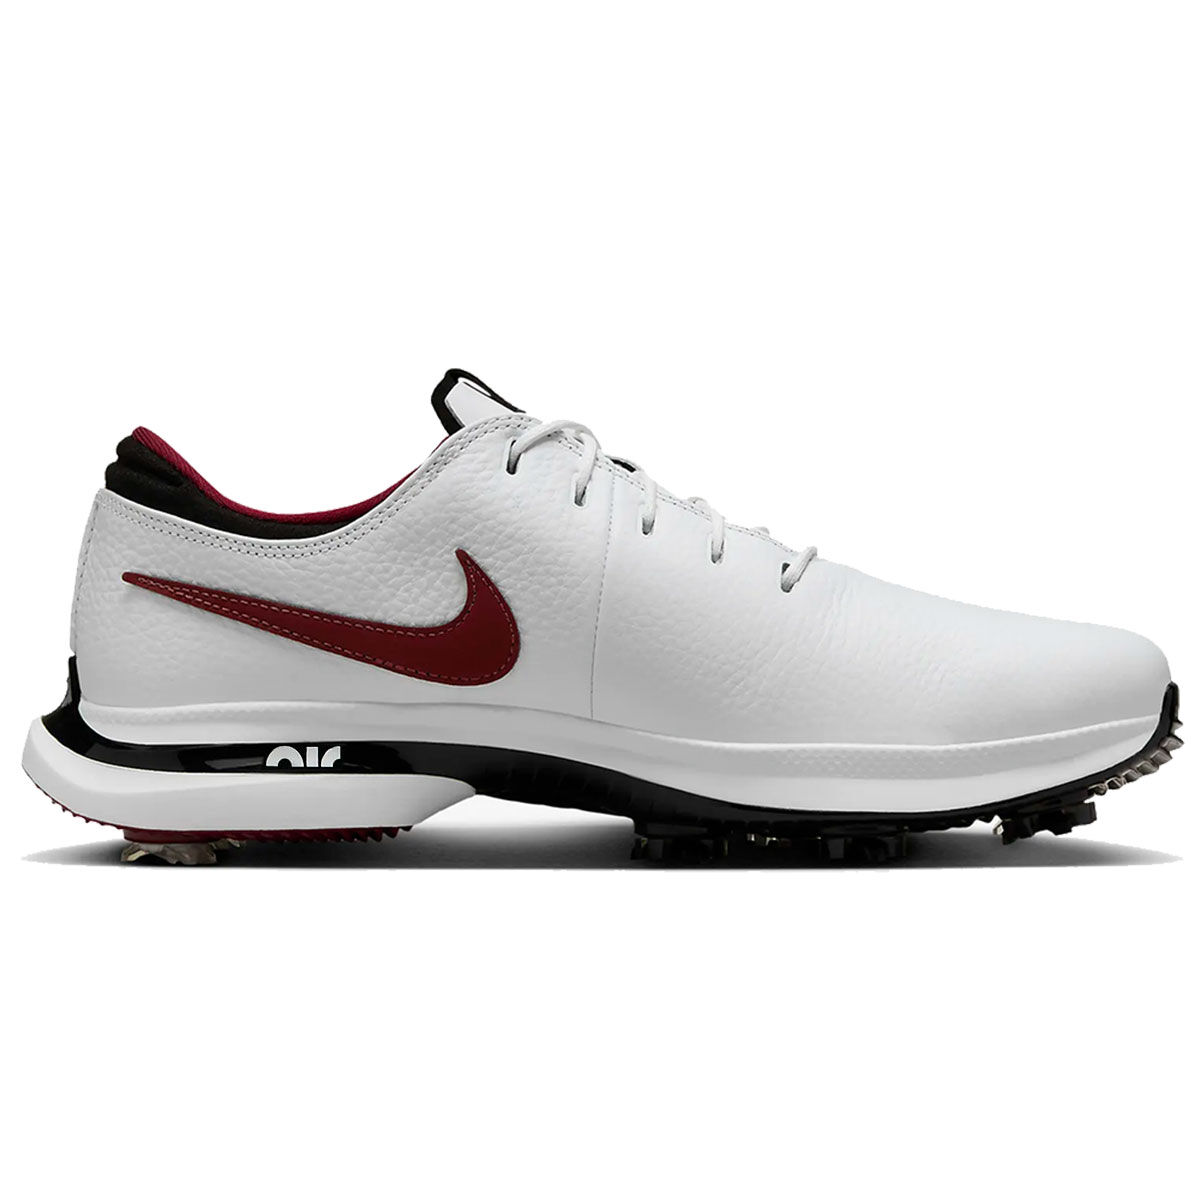 Nike Air Zoom Victory Tour 3 Waterproof Spiked Golf Shoes, Mens, White/red/black, 7 | American Golf von Nike Golf